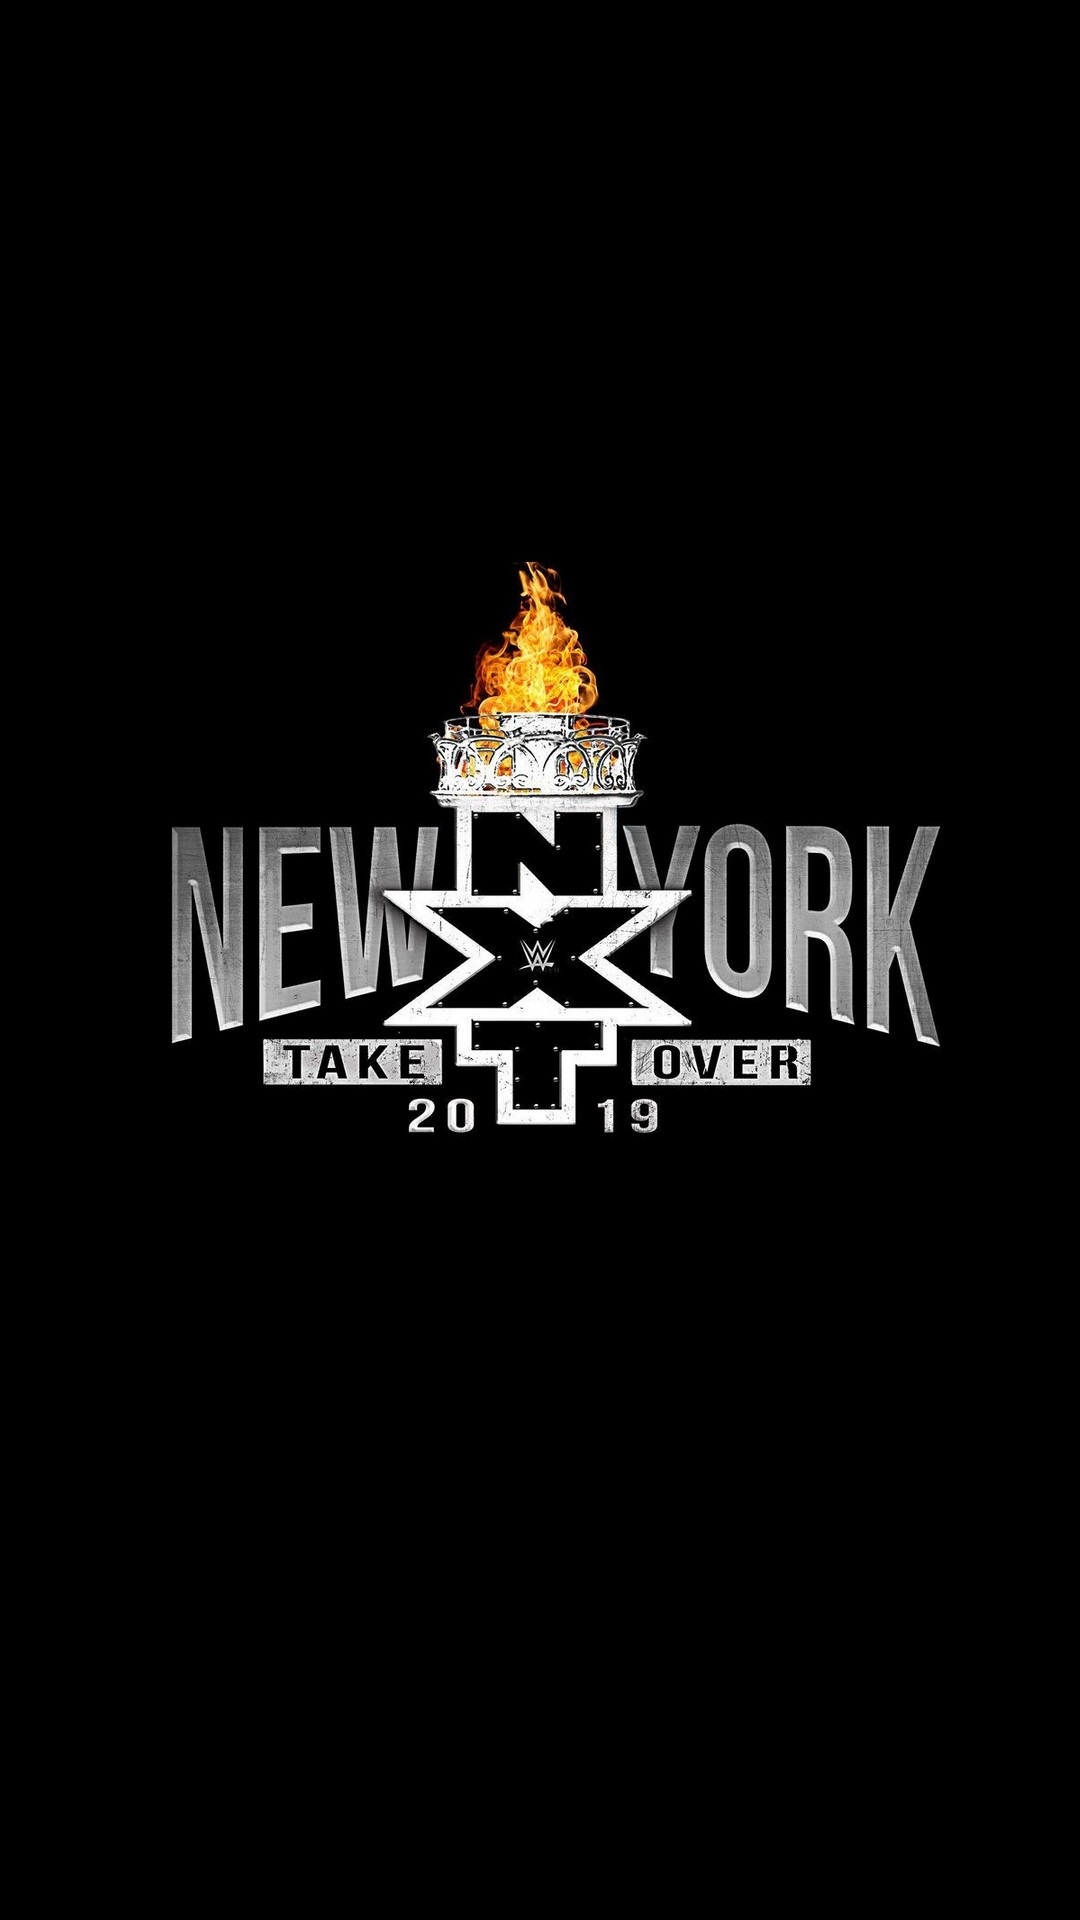 NXT Takeover New York iPhone Wallpaper With high-resolution 1080X1920 pixel. You can use this wallpaper for your iPhone 5, 6, 7, 8, X, XS, XR backgrounds, Mobile Screensaver, or iPad Lock Screen